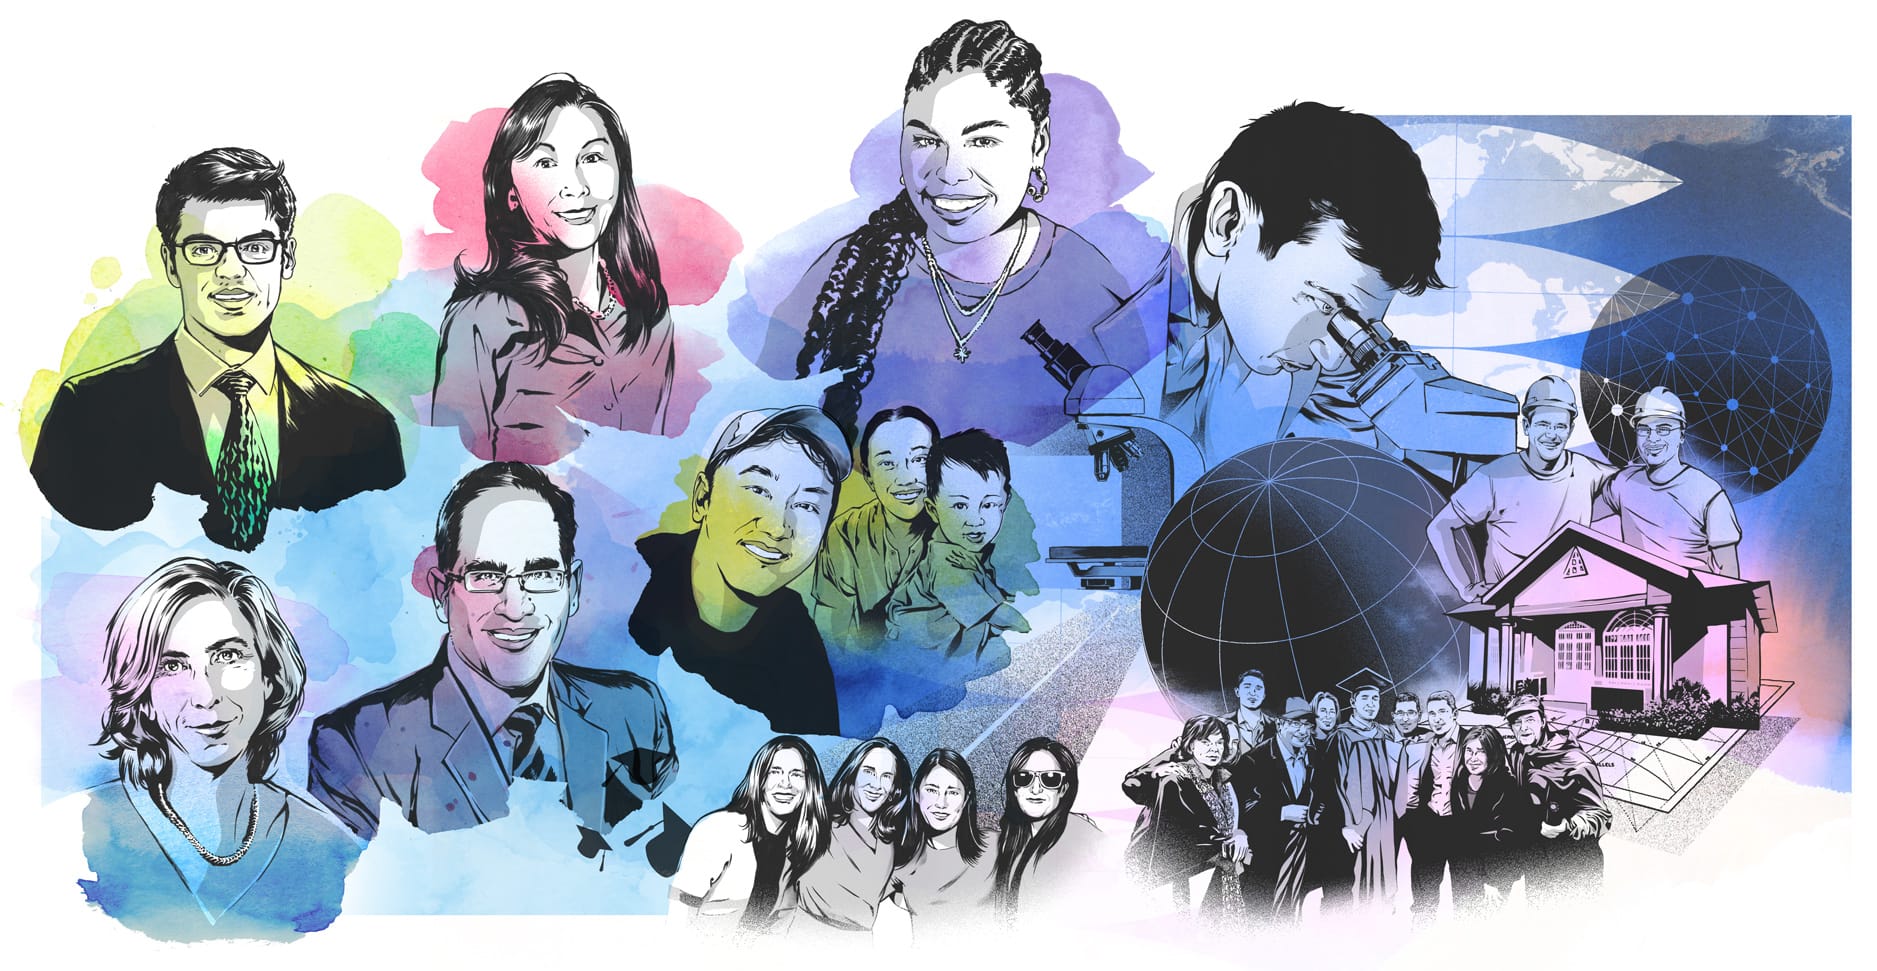 Illustrated collage of various Wharton alumni who appear throughout this piece.